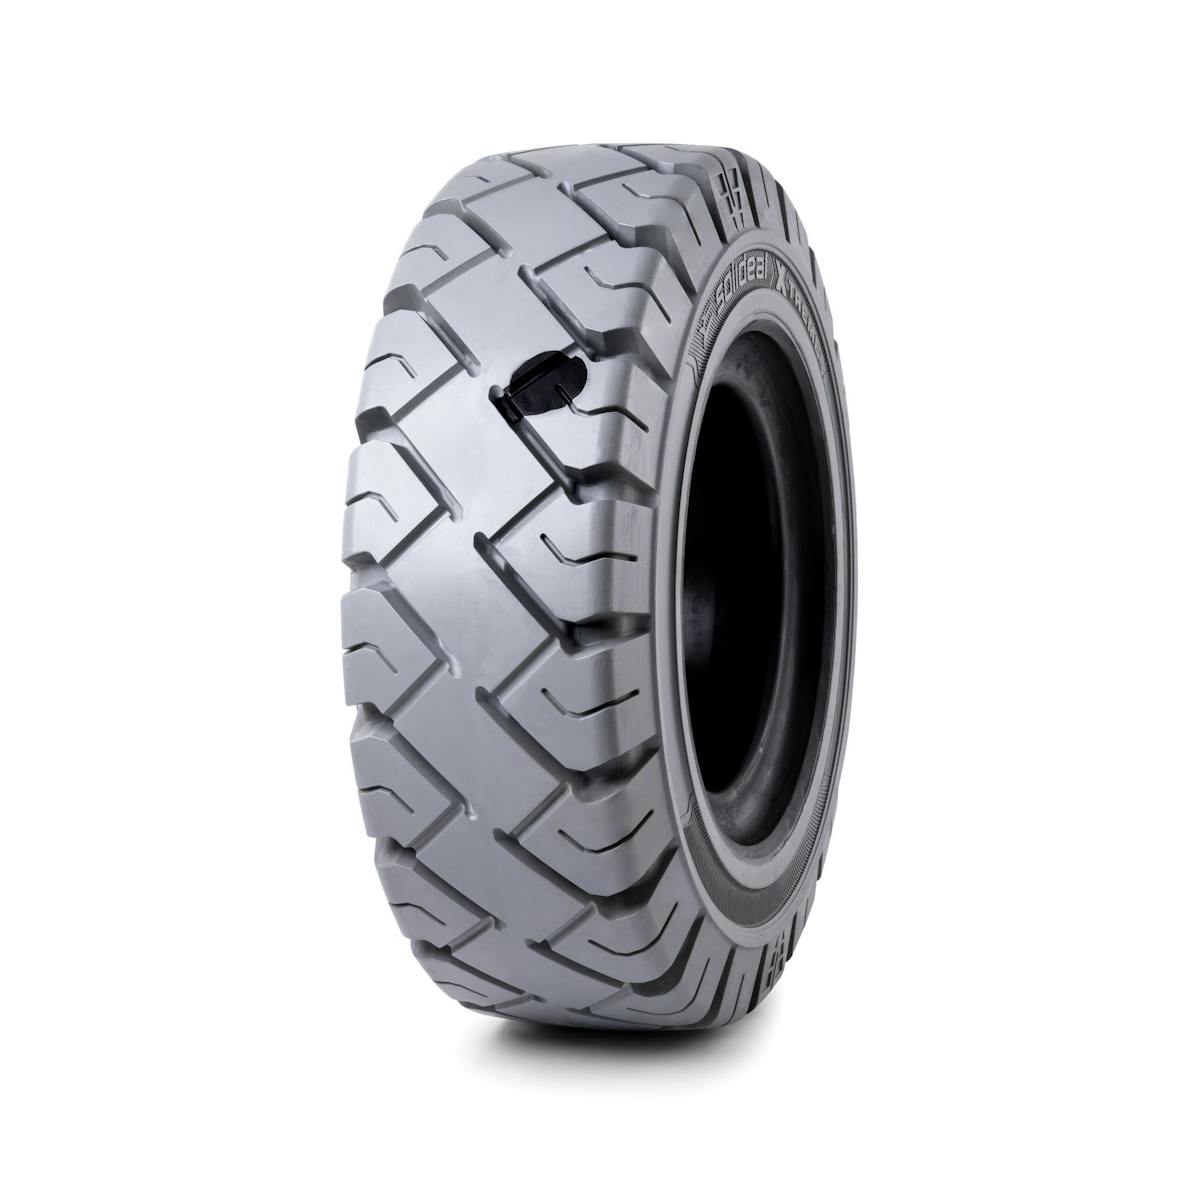 camso-adds-to-its-non-marking-anti-static-tire-lineup